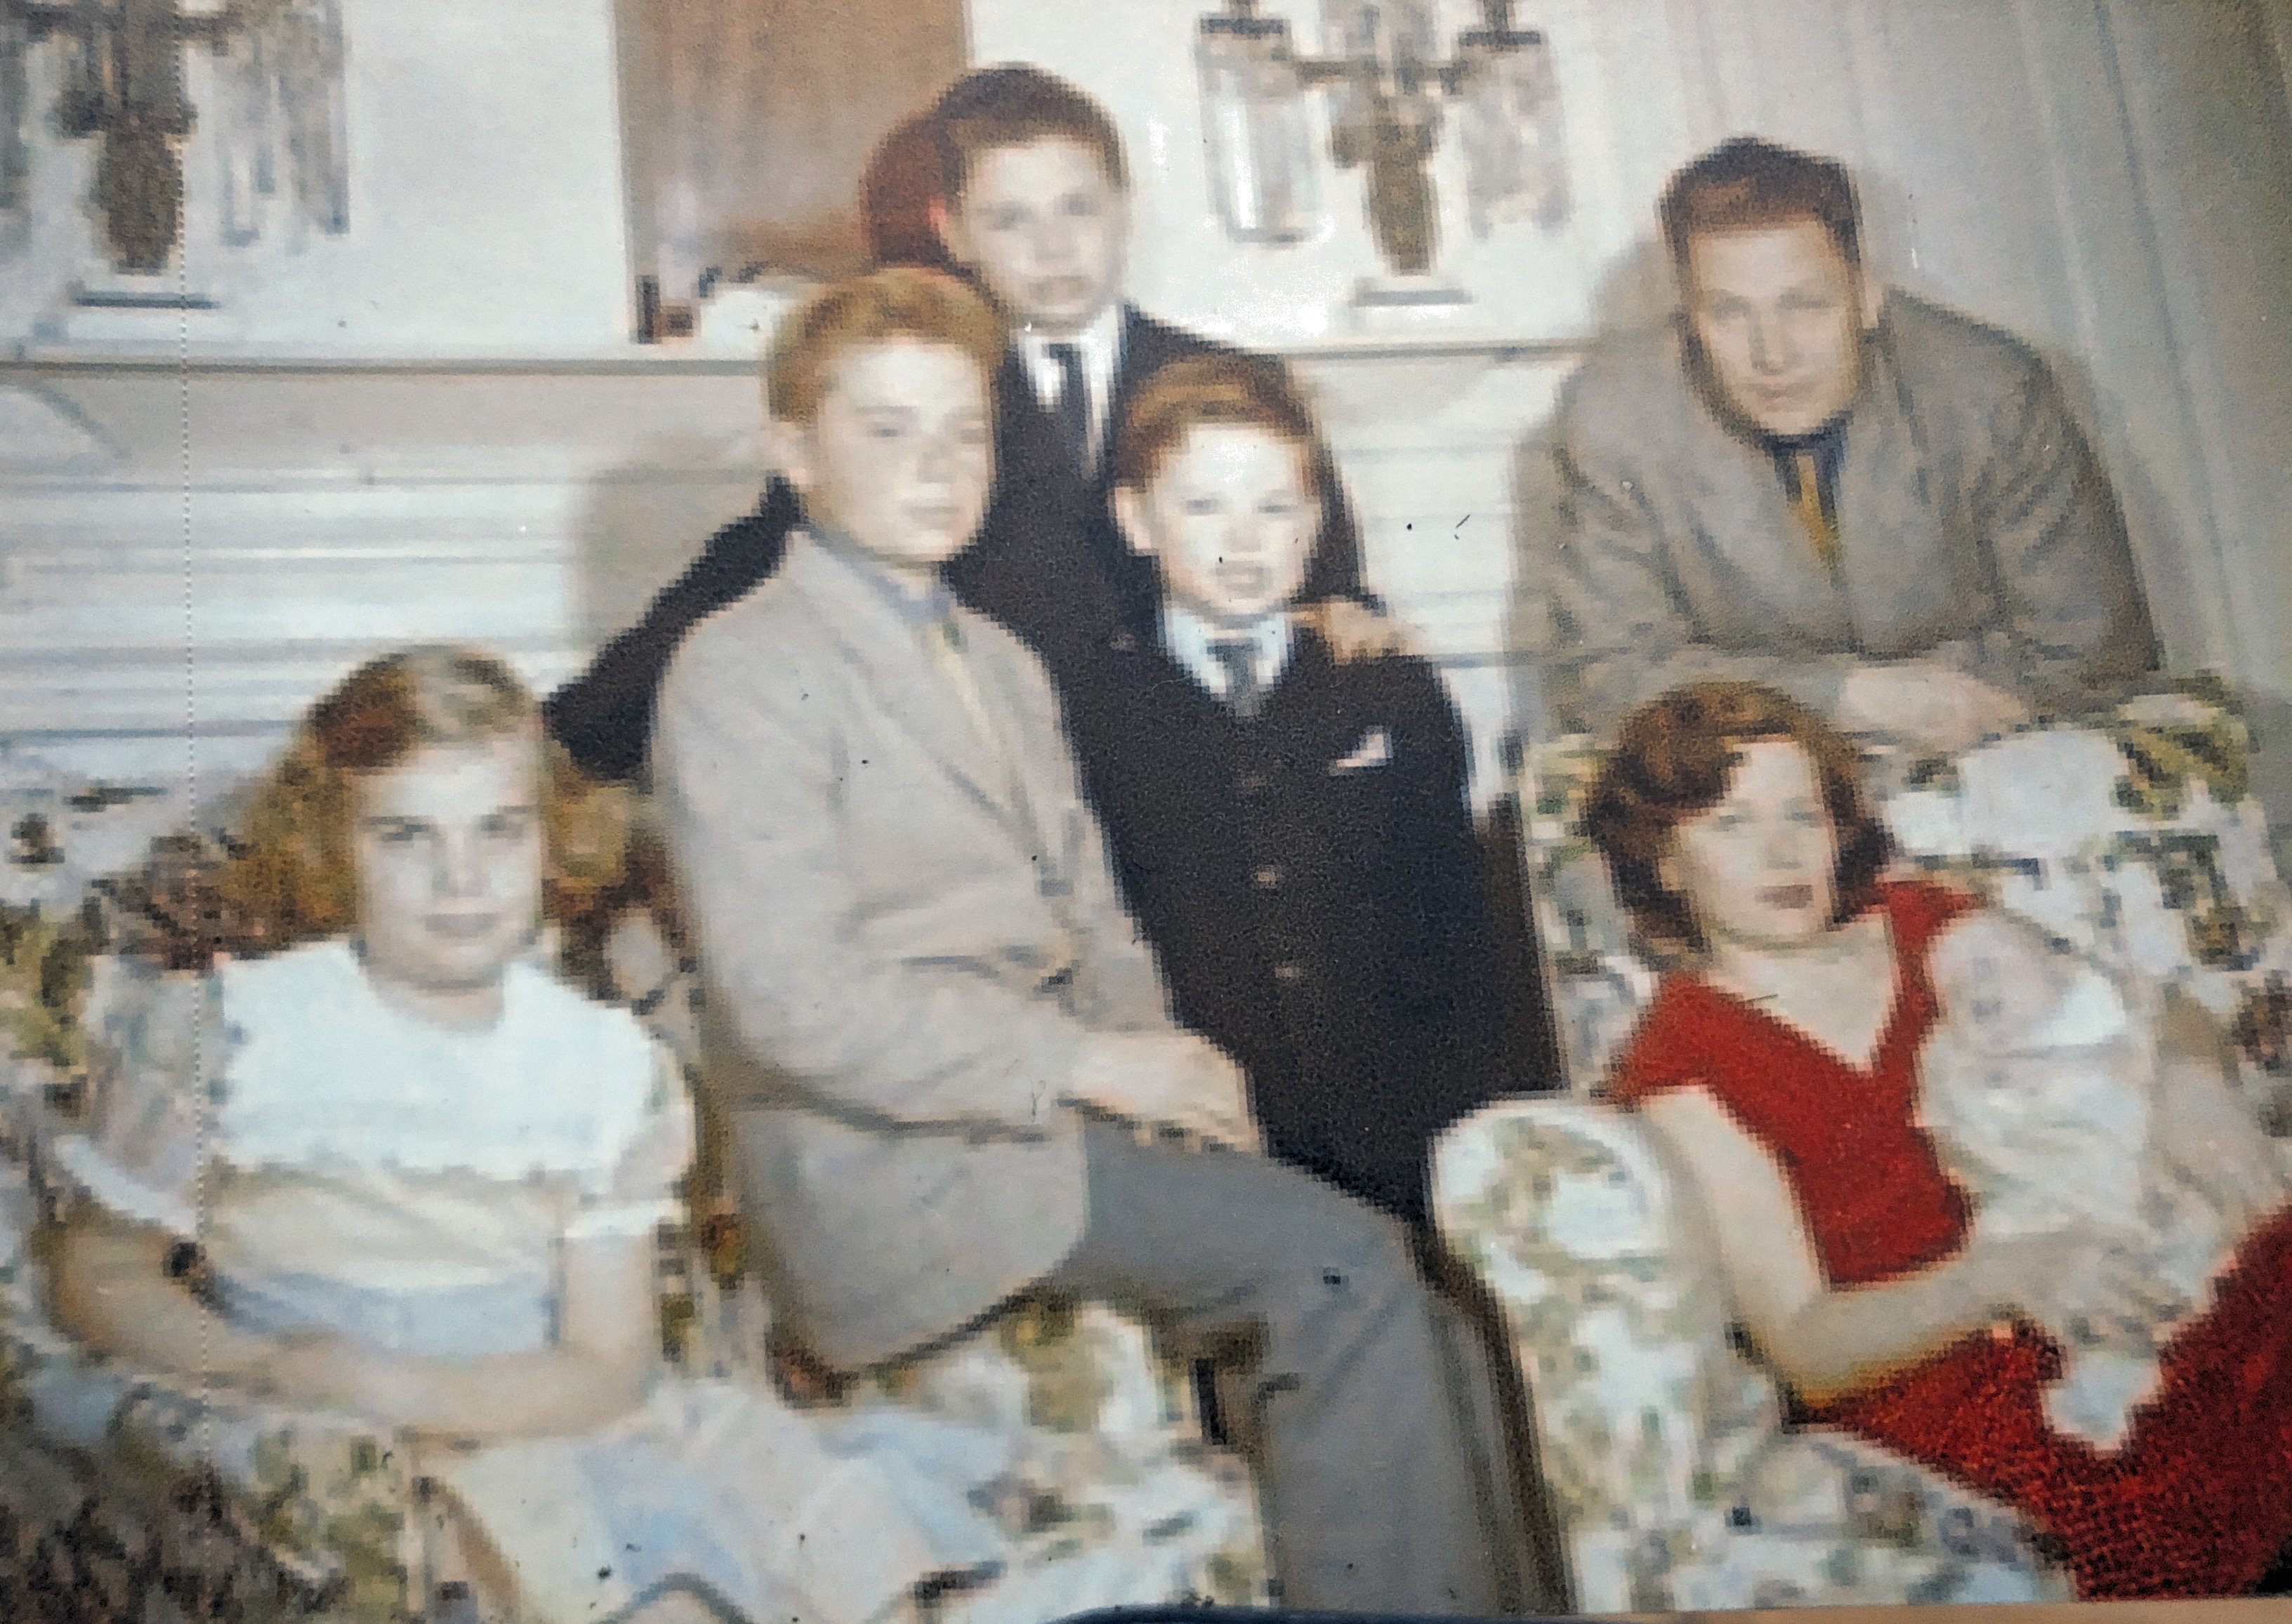 My husband family portrait. Year 1952. WILLIAMS family from
New York 